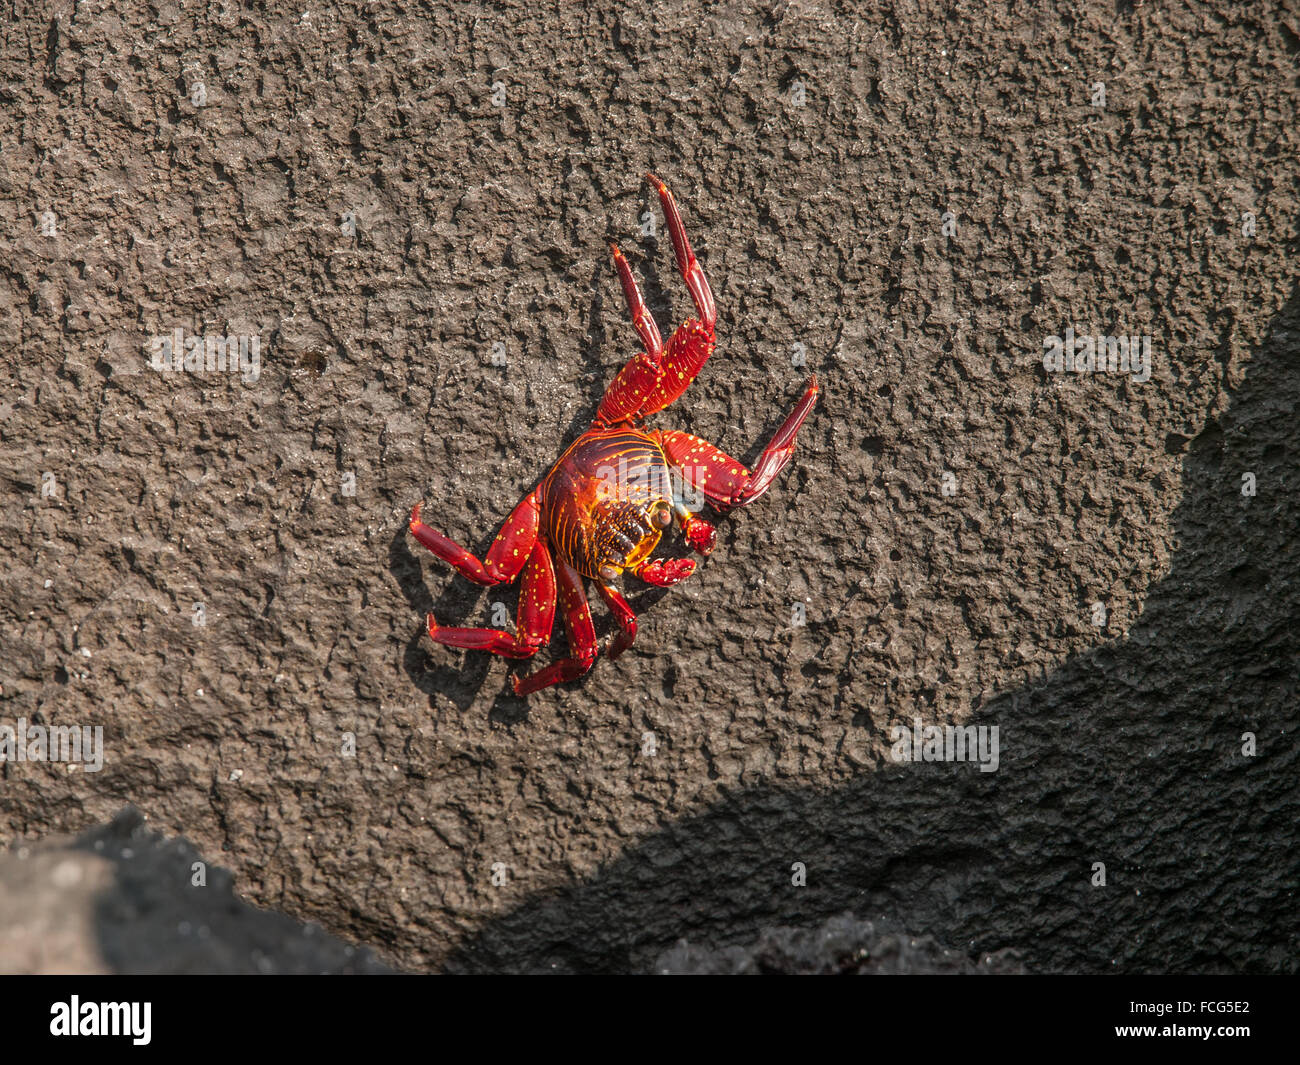 Red and orange Sally Lightfoot crab on black lava rock in the Galapagos Islands, Ecuador. Stock Photo